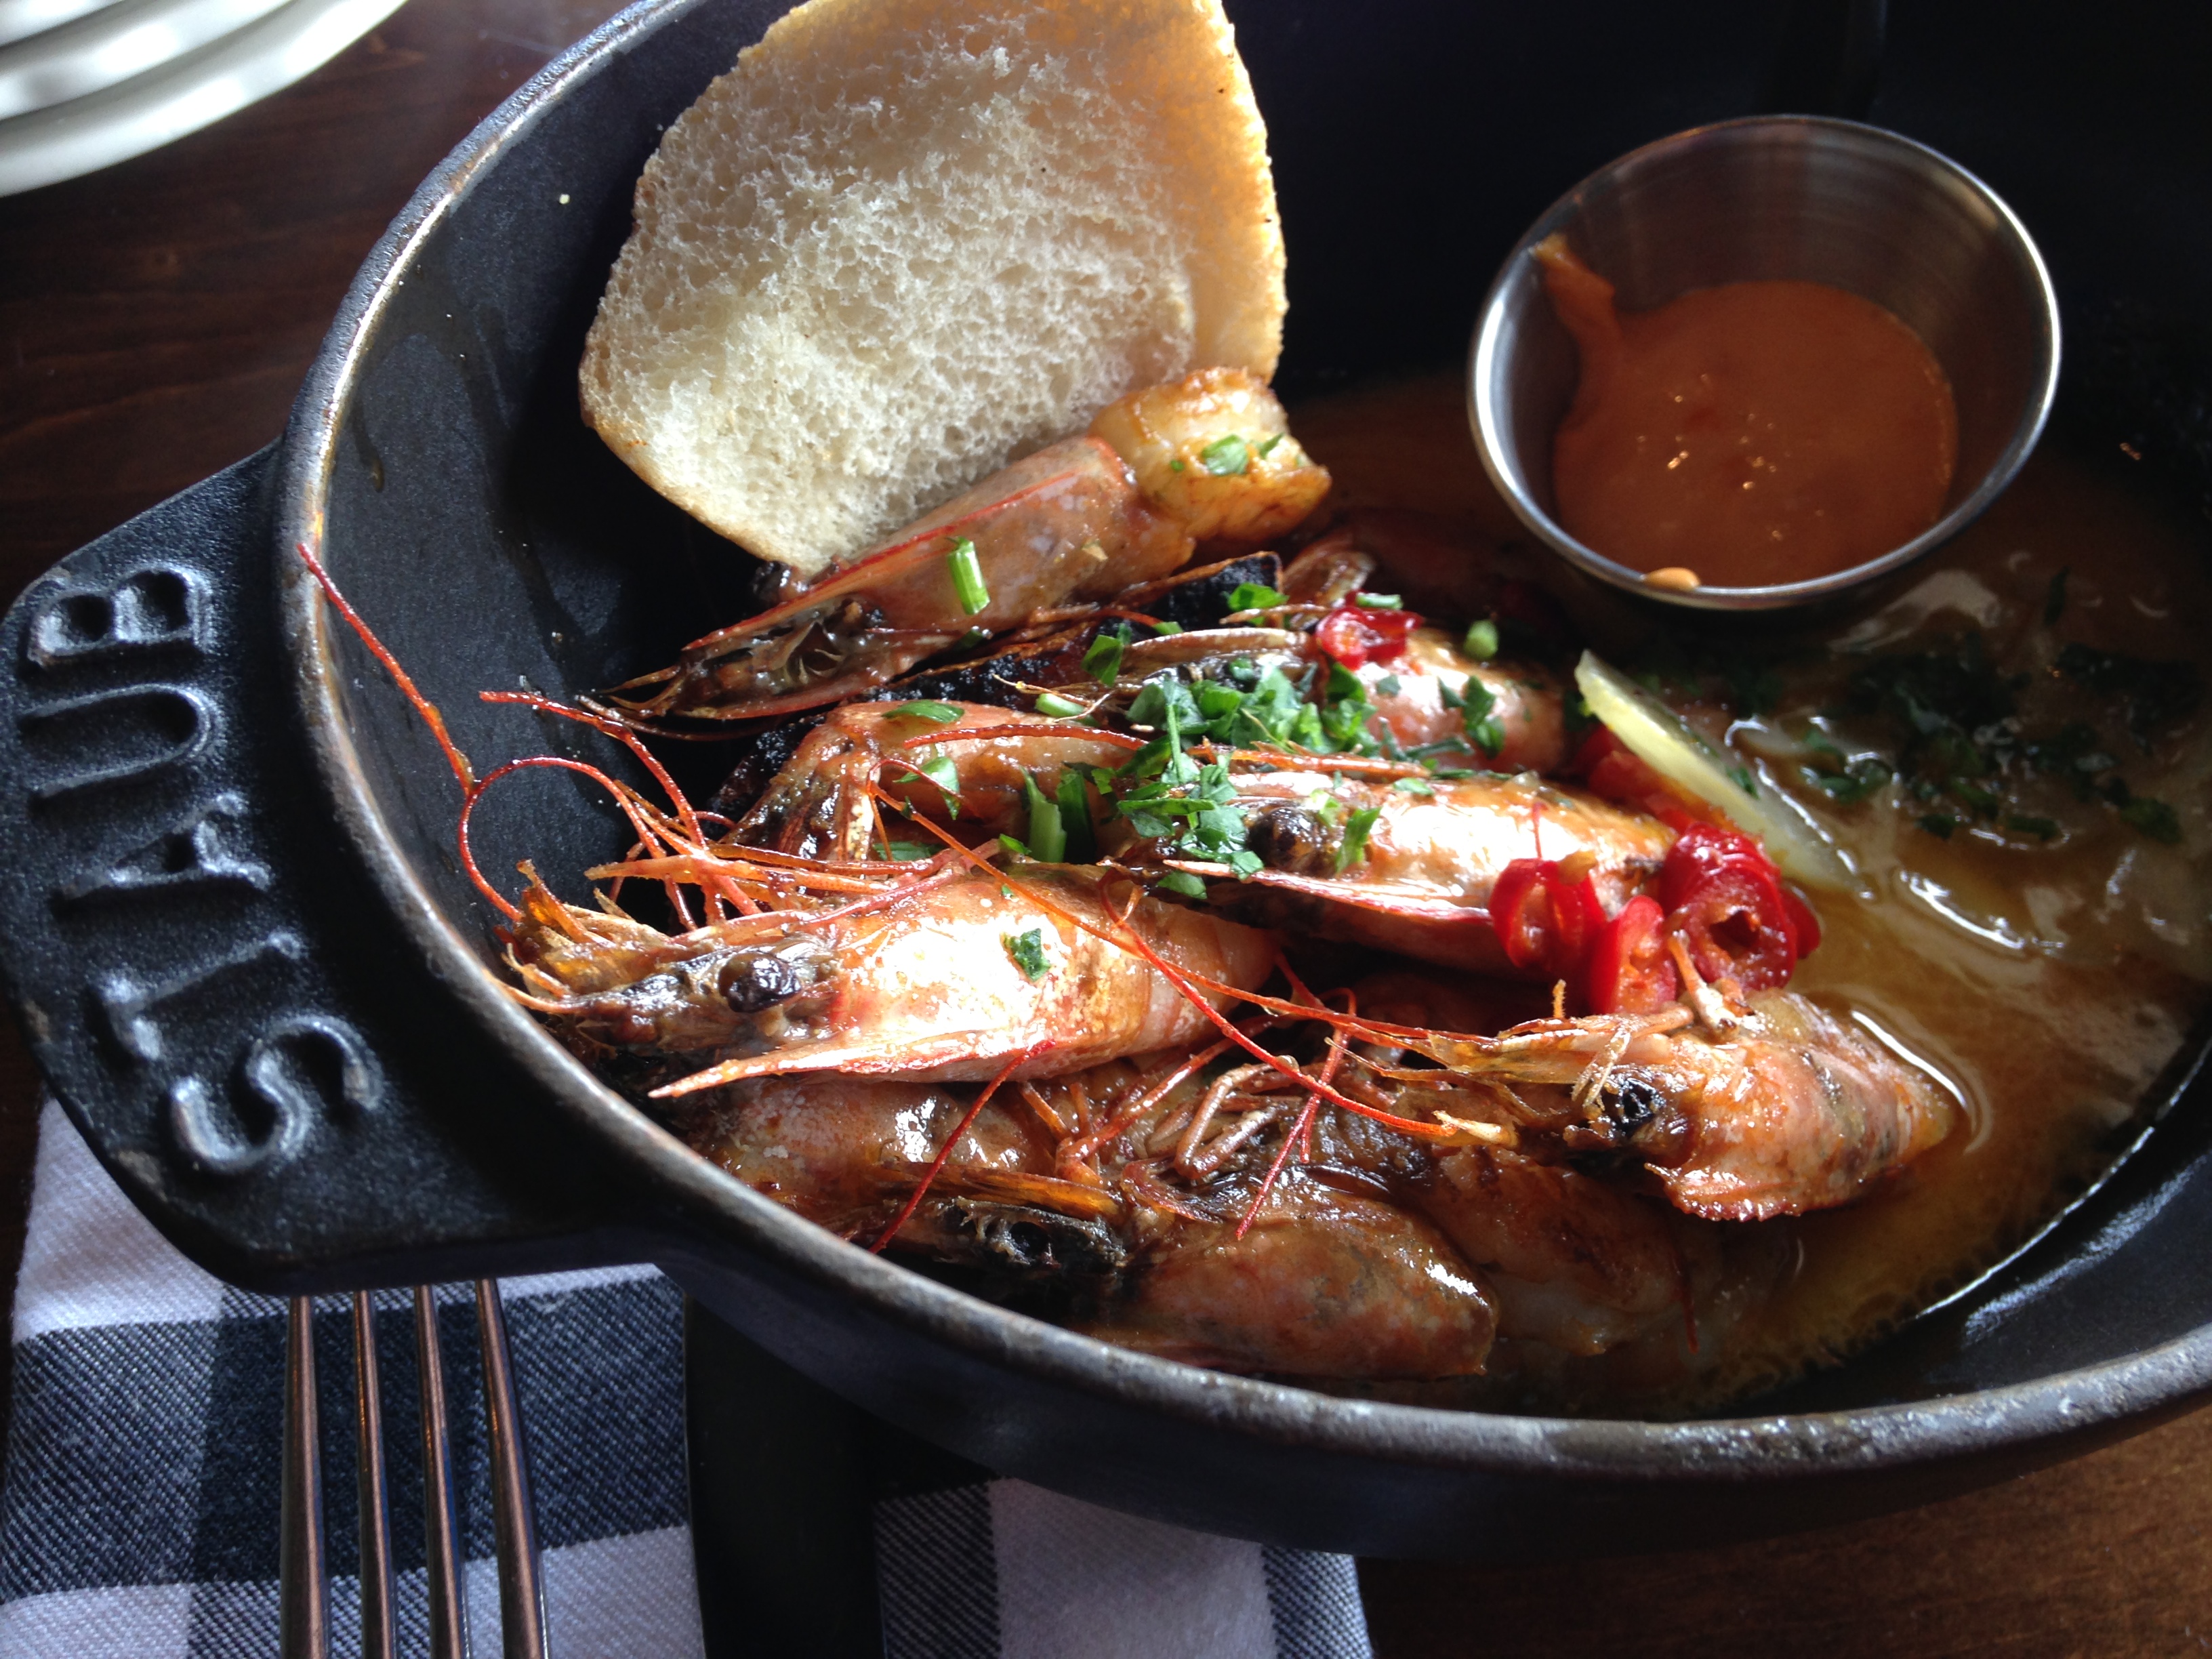 Cask and Larder’s Florida Cape Canaveral Shrimp with Toasted Baguette recipe